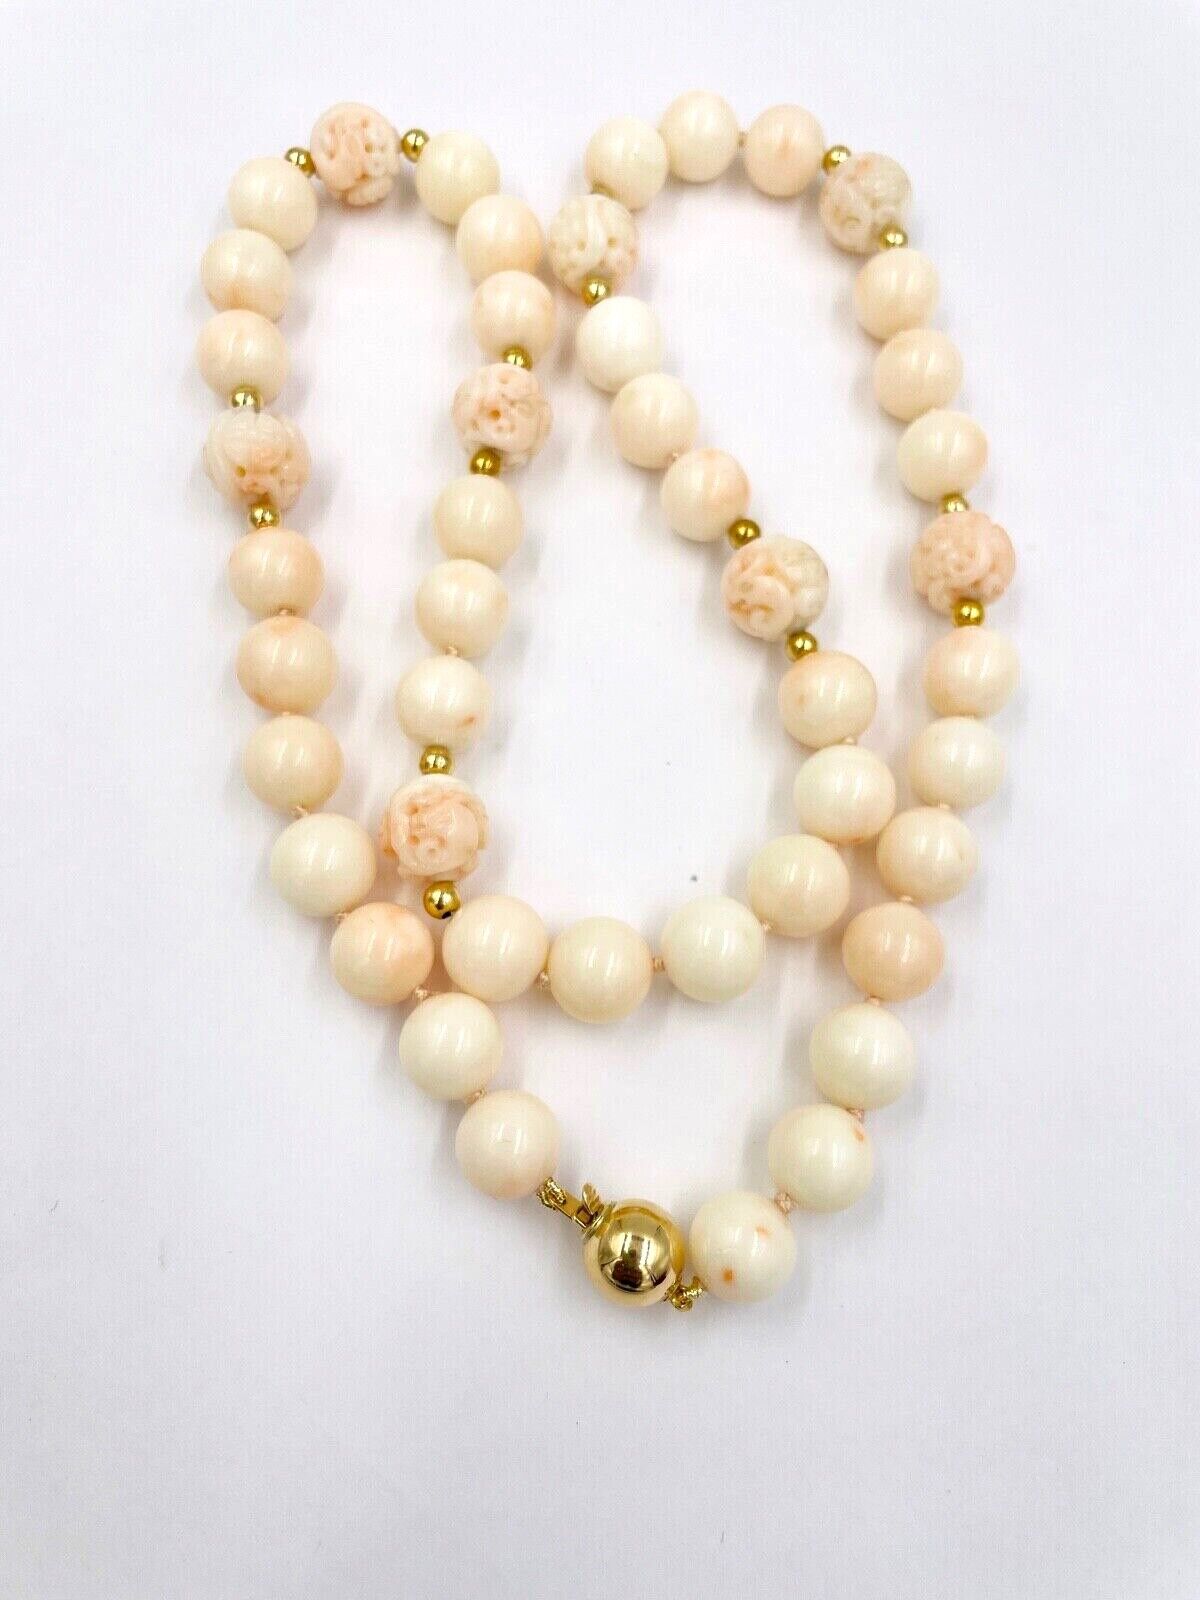 Imitation Pearls Beads Strand Gold Bead Caps Jewelry Making 14mm Crafts  Vintage 